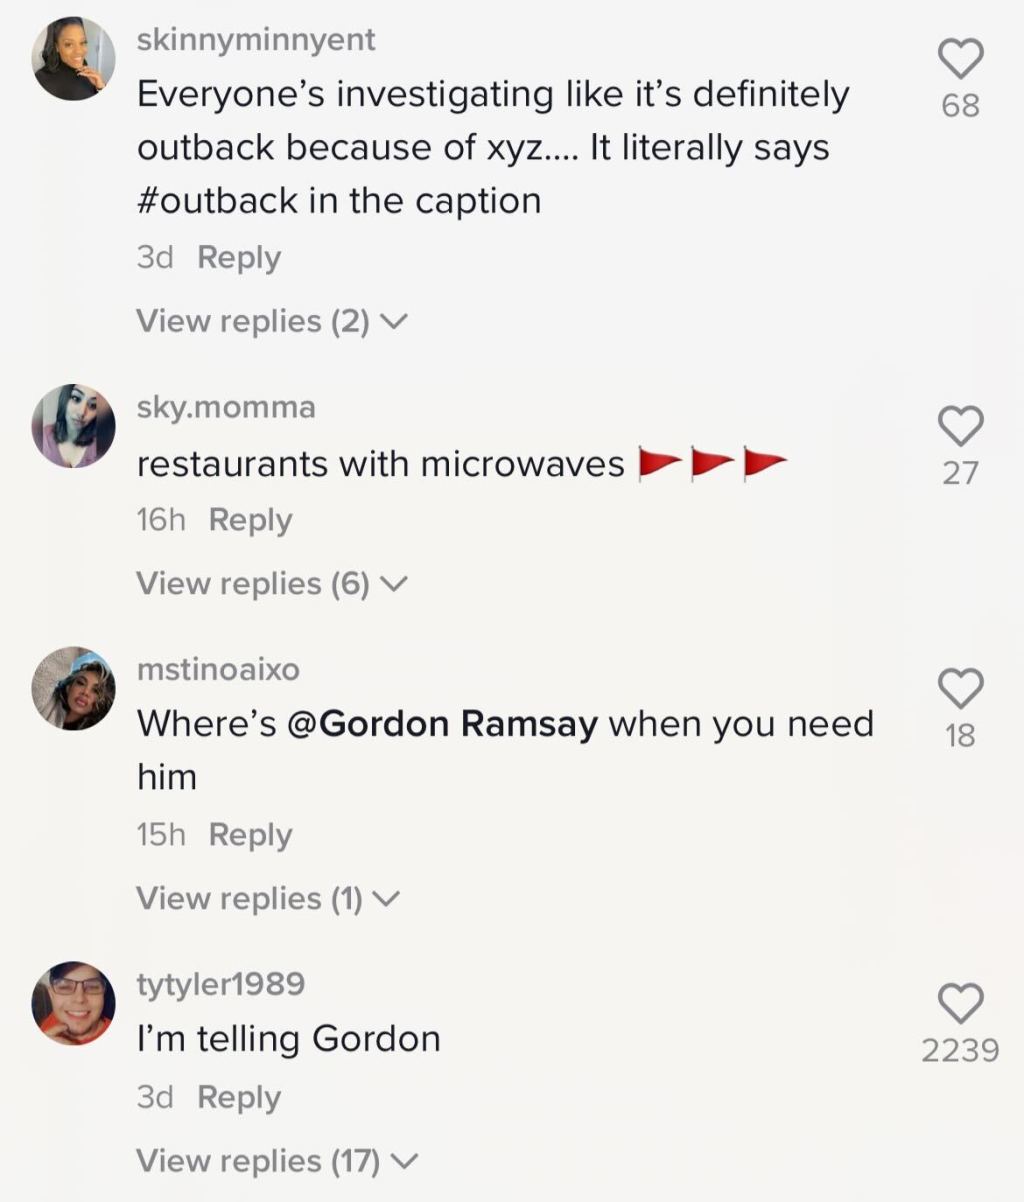 Outback Steakhouse Lobster Exposed In Viral Tiktok, Everyone's Horrified